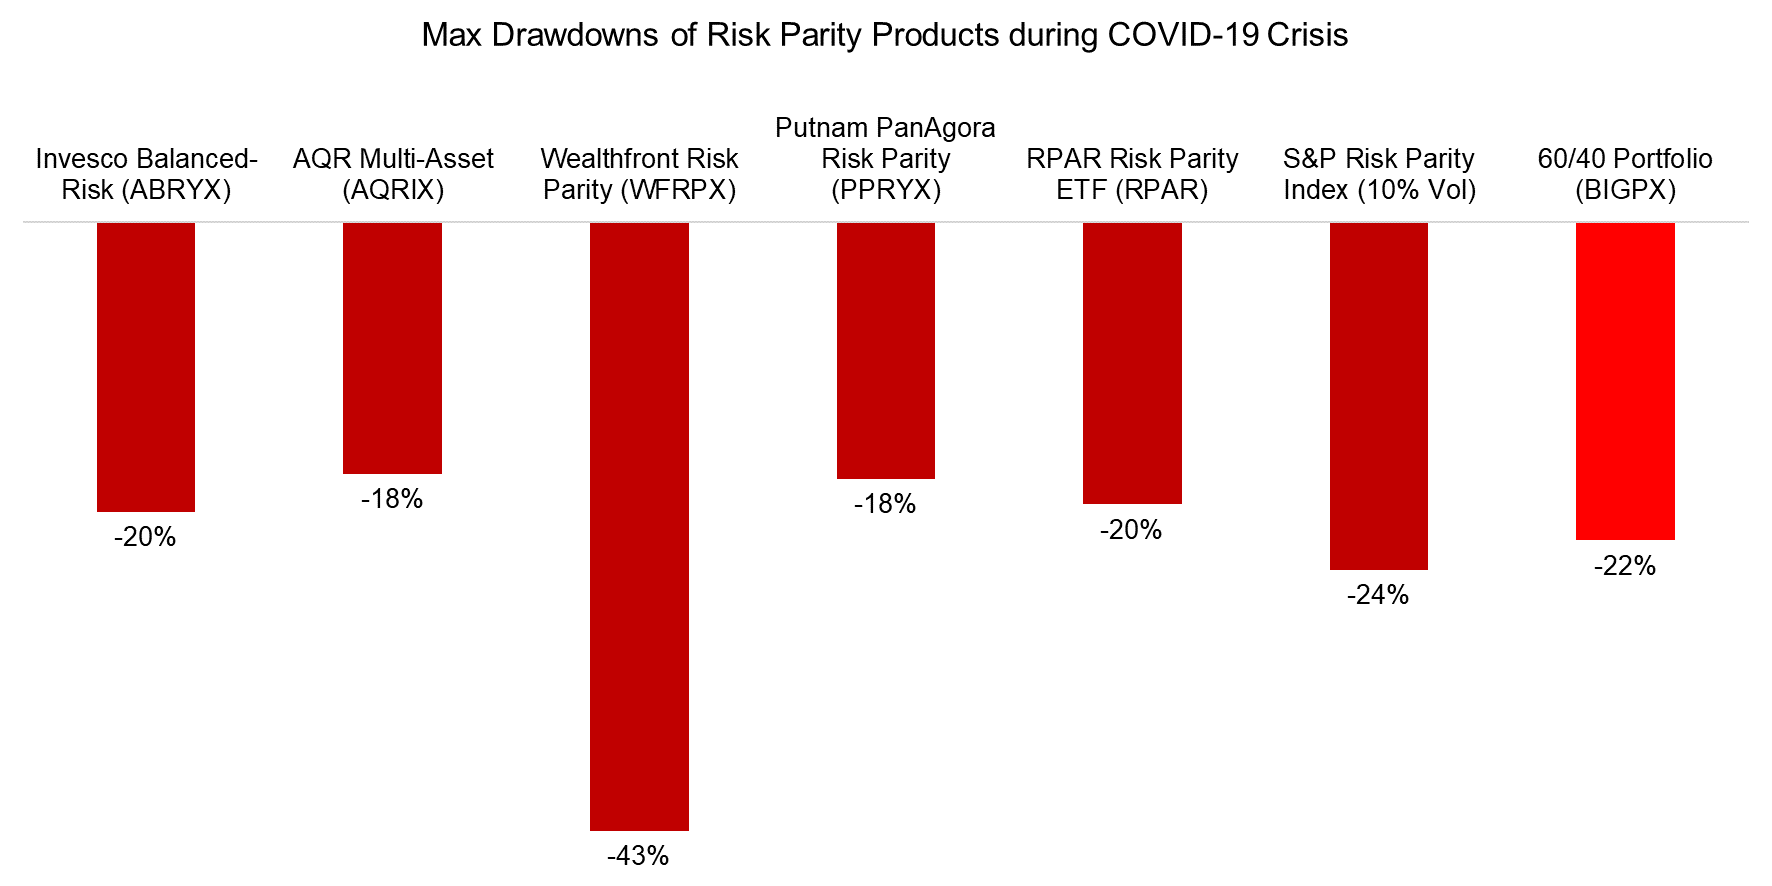 Max Drawdowns of Risk Parity Products during COVID-19 Crisis